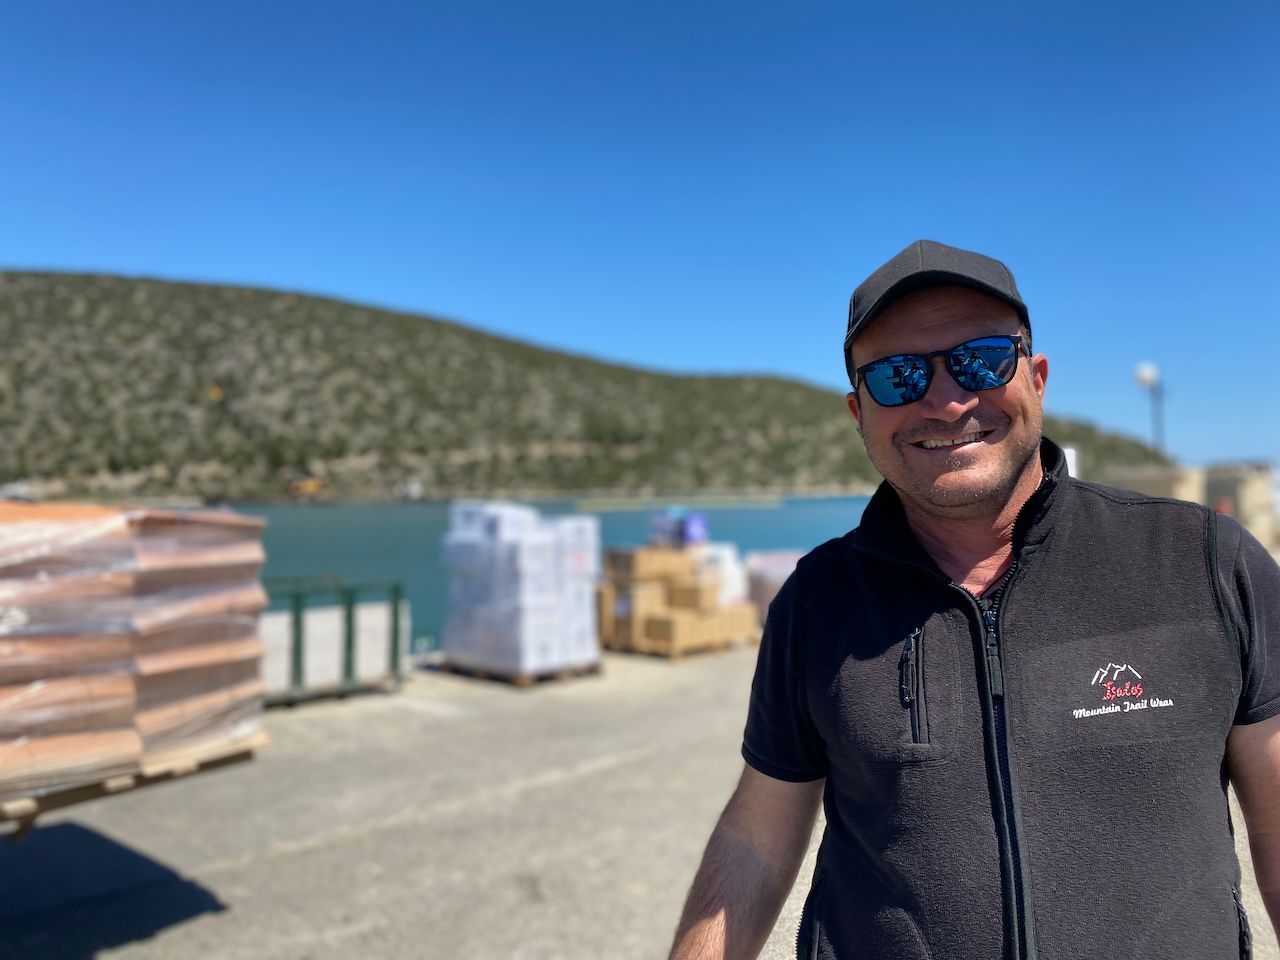 Fanis Mavroumatis the Captain of the Maragos Supply Boat, Georgia, for deliveries to Hydra Island Greece.